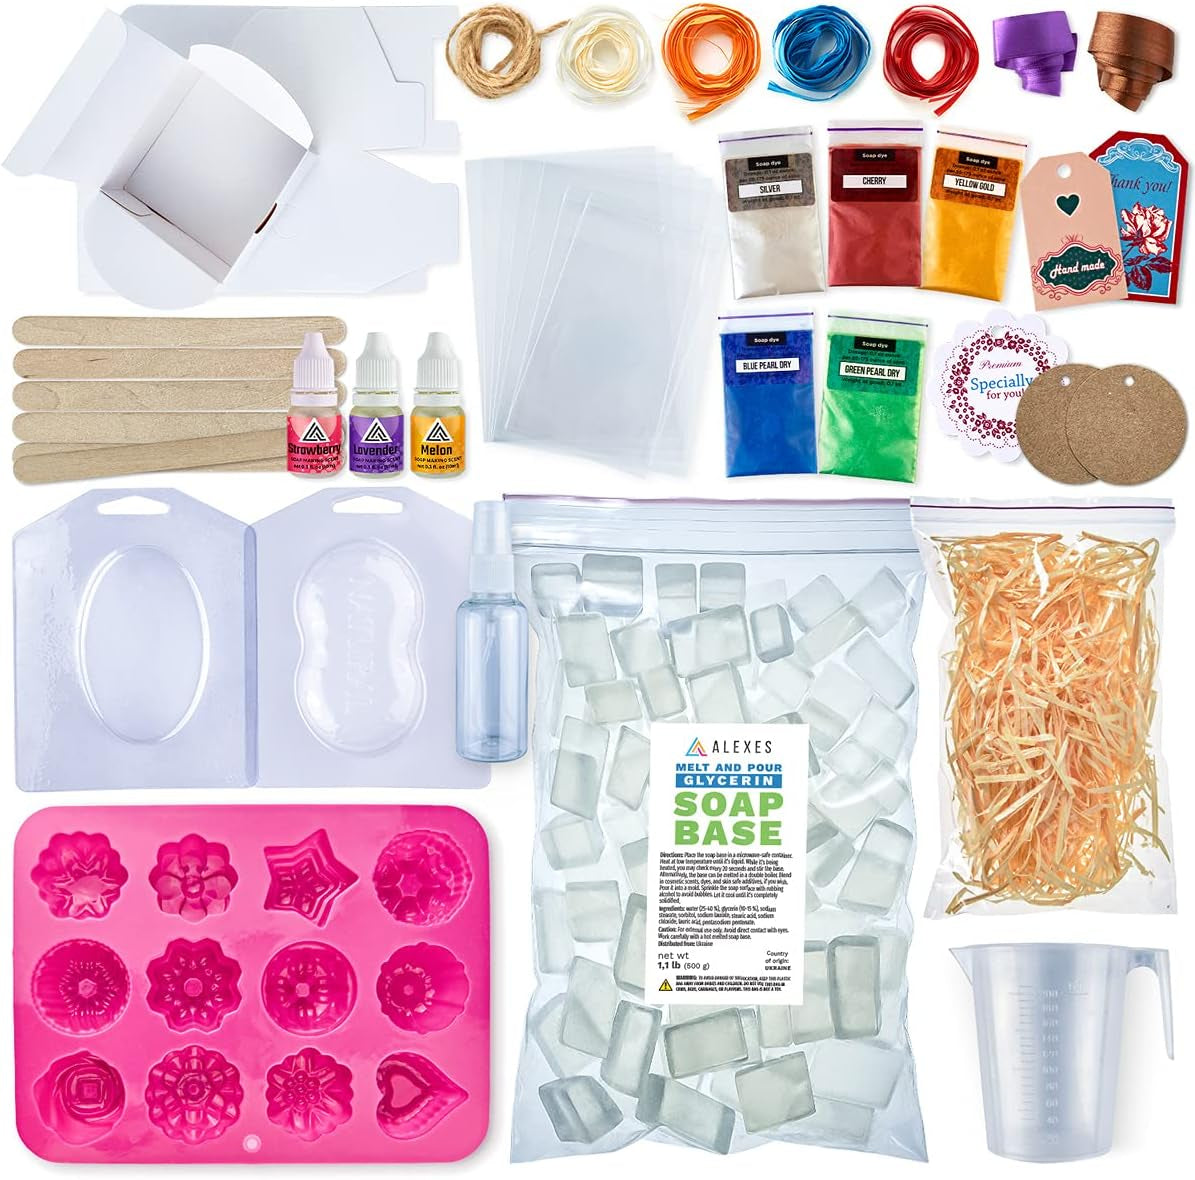 Soap Making Kit - Make Your Own Handmade Soap - DIY Soap Making Supplies Kit for Adults - 1.1 Lb Glycerin Soap Base - for Beginners